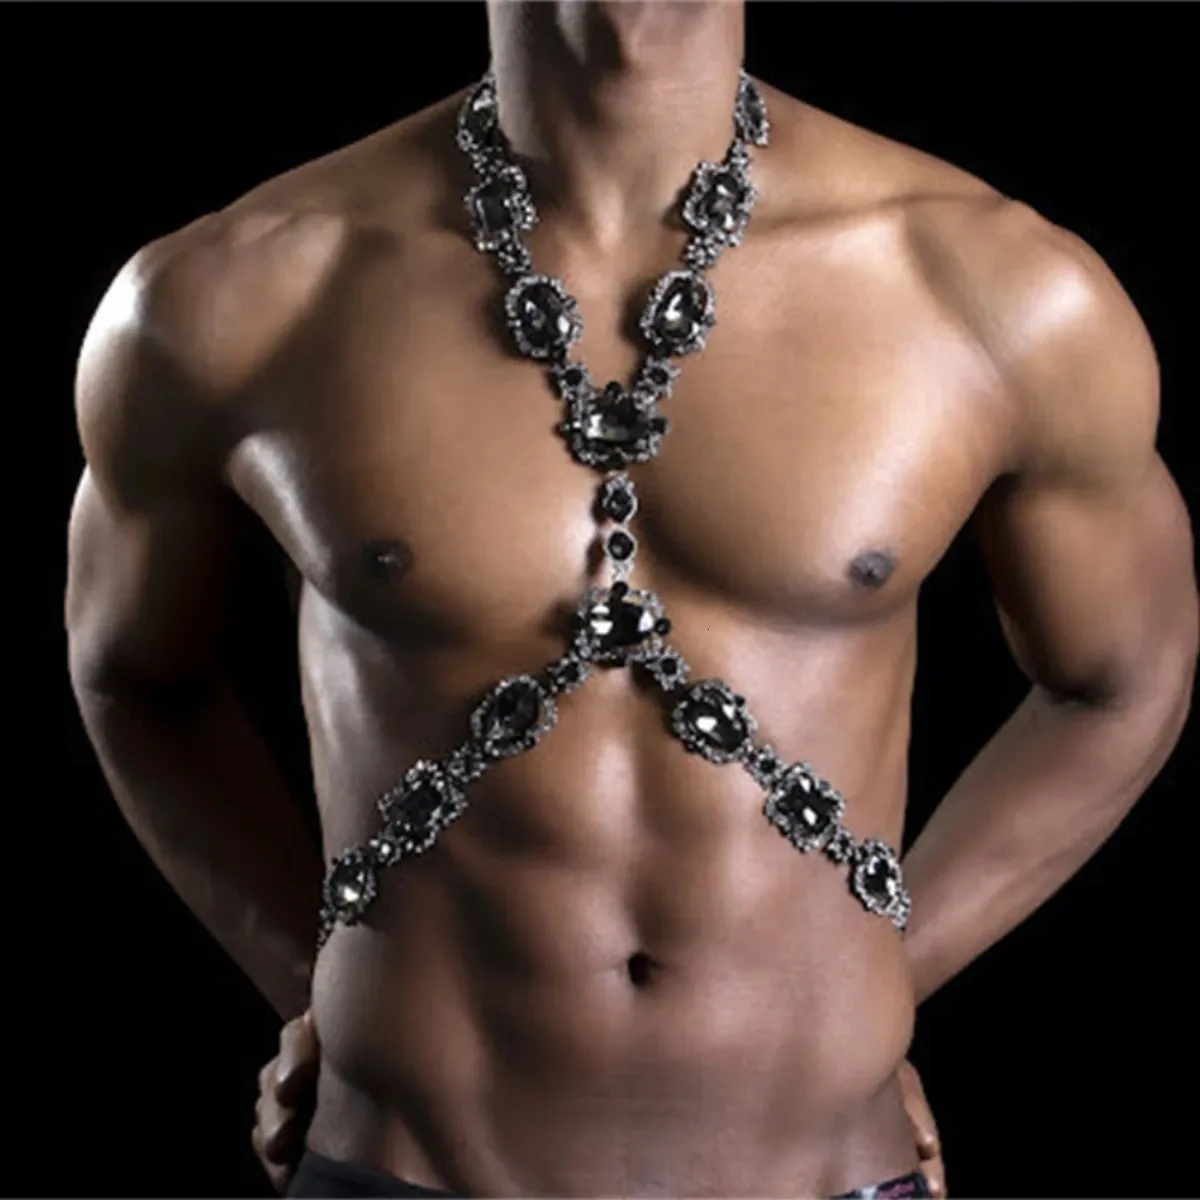 Luxury Square Rhinestone Men Chest Jewelry Party Body Accessories 2023 Multirow Crystal Top Sexig BRA Chain Harness Christmas 240127